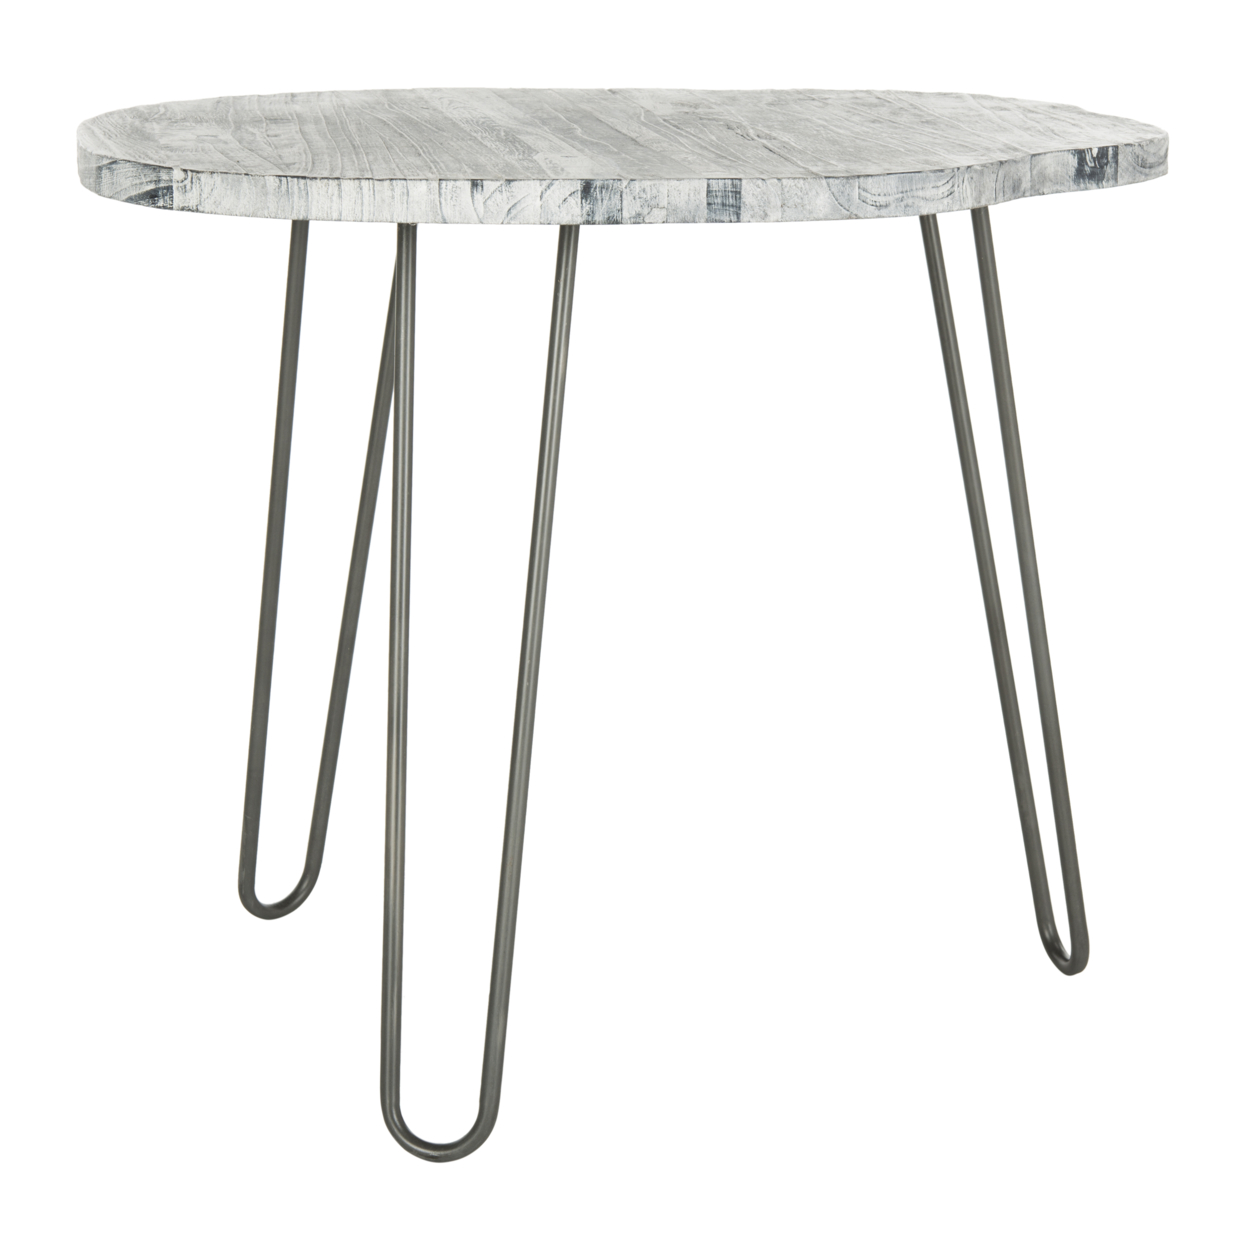 SAFAVIEH Mindy Wood Top Dining Table Grey / White Washed